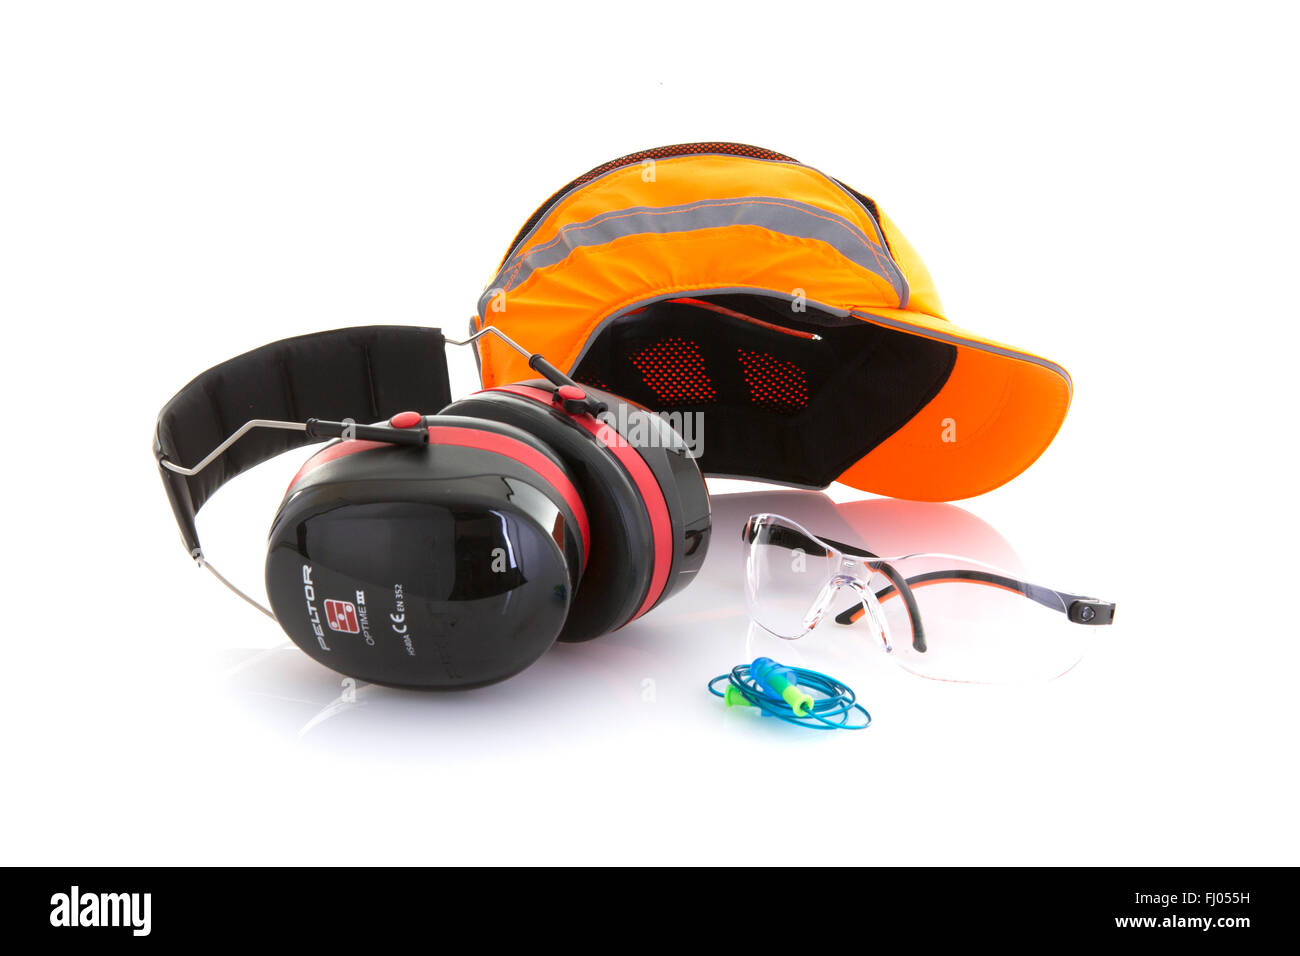 Orange Bump Cap Safety Hat with Ear Defenders, Ear Plugs and safety glasses on a White Background Stock Photo